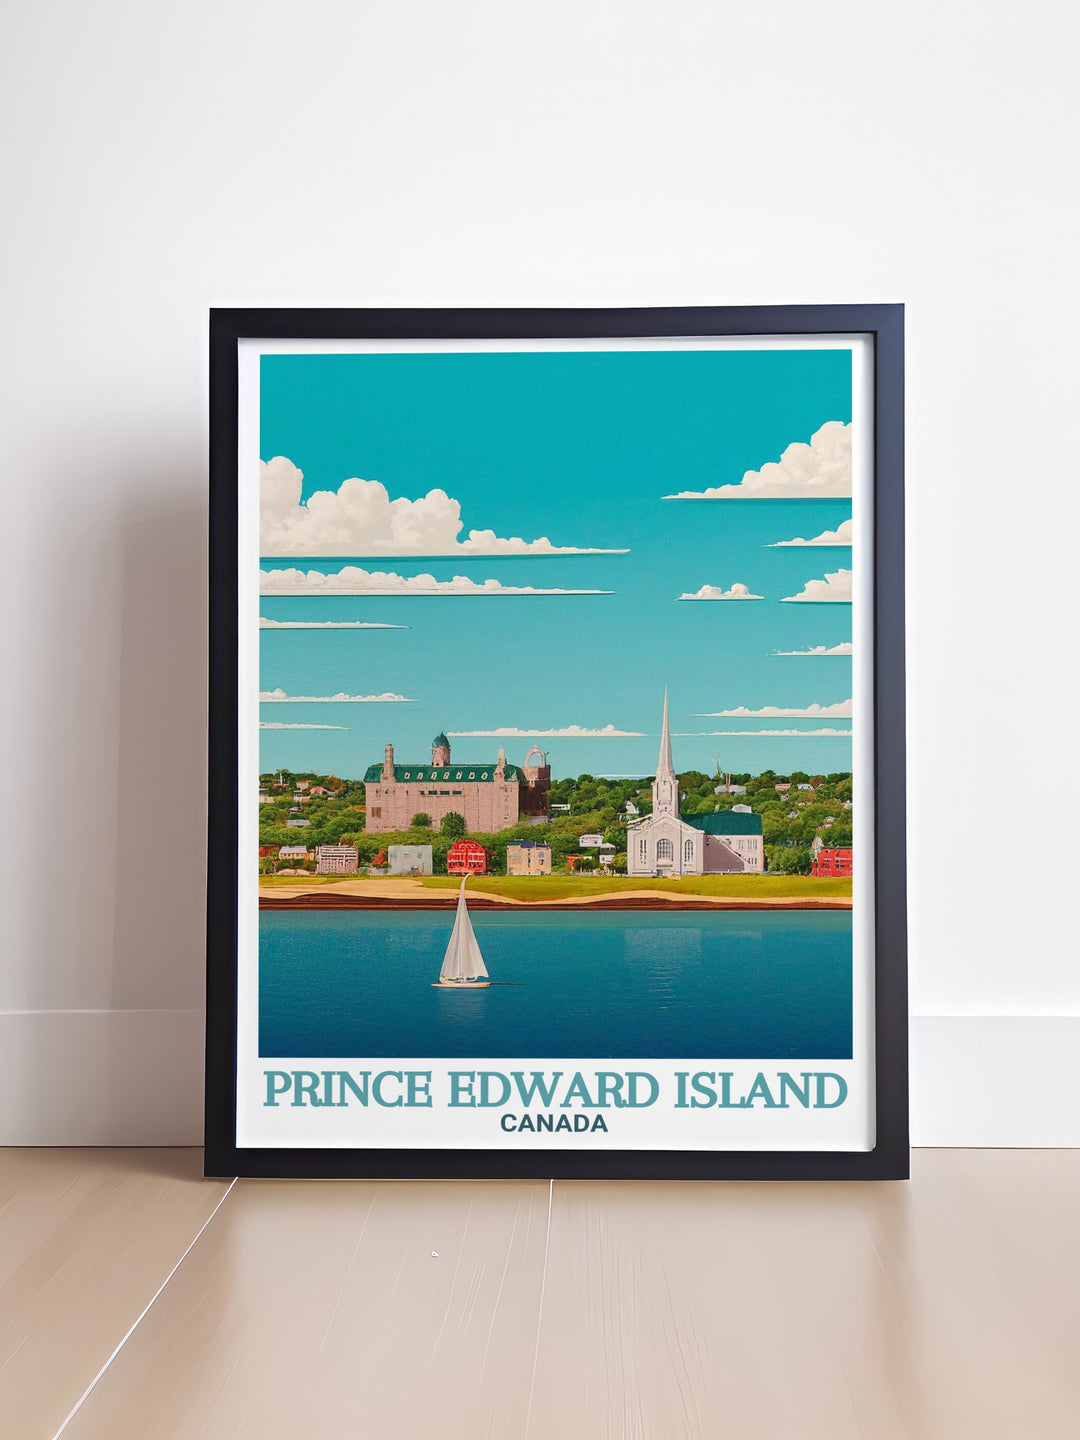 Modern Charlottetown artwork showcasing the towns charming streets and breathtaking sunsets perfect for enhancing your living room décor or as a thoughtful birthday gift highlighting the elegance and natural beauty of Prince Edward Island.